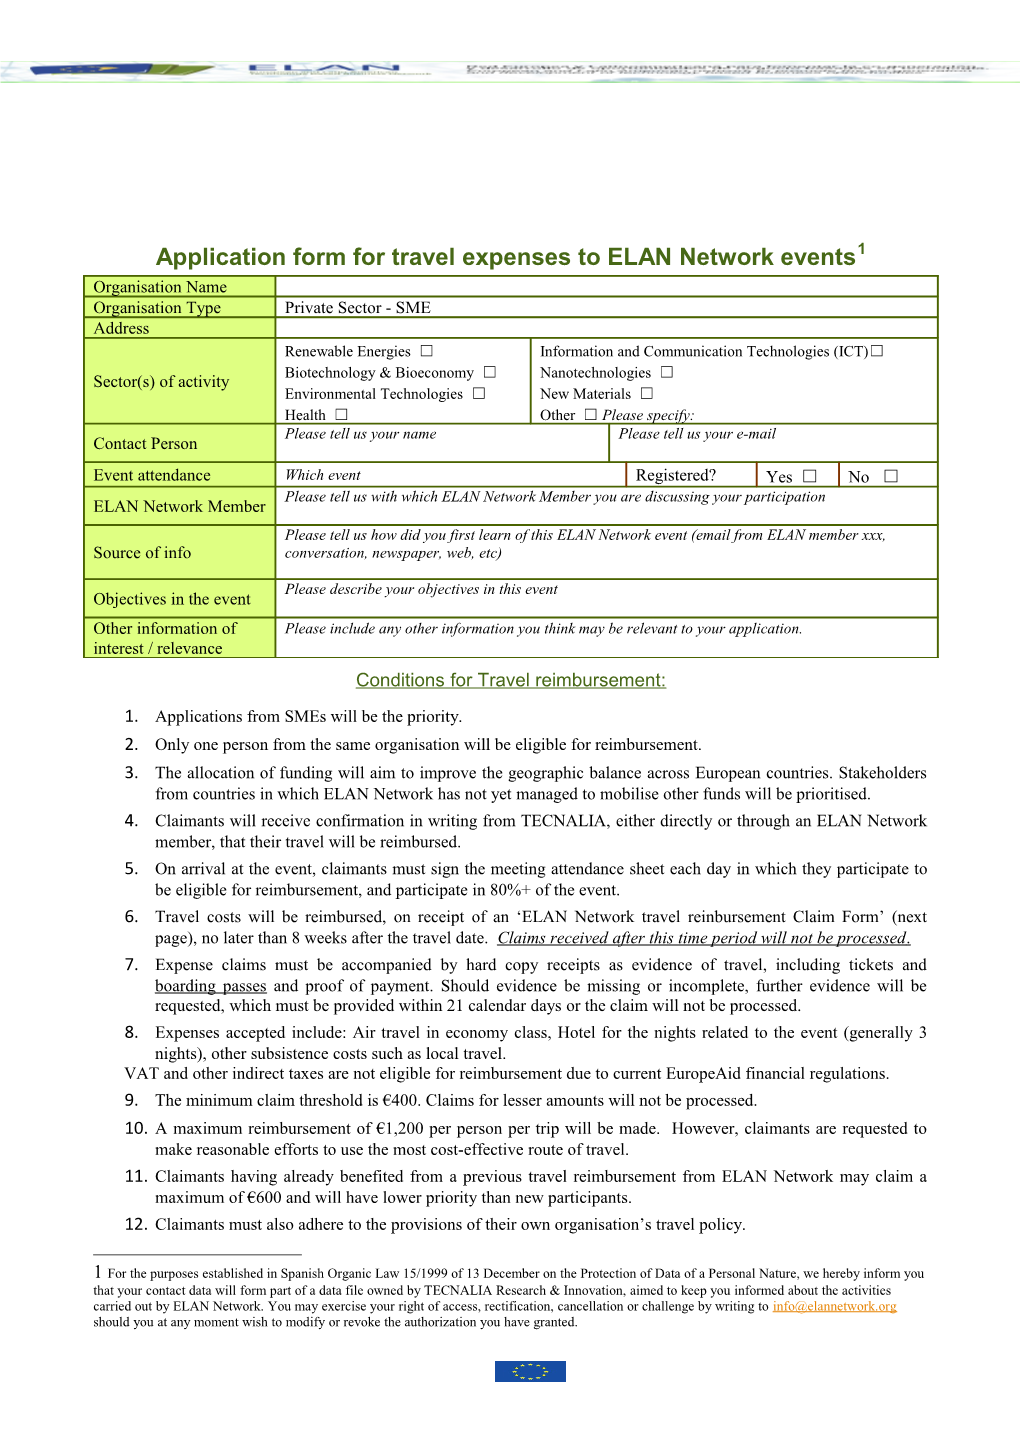 Application Form for Travel Expenses to ELAN Network Events 1